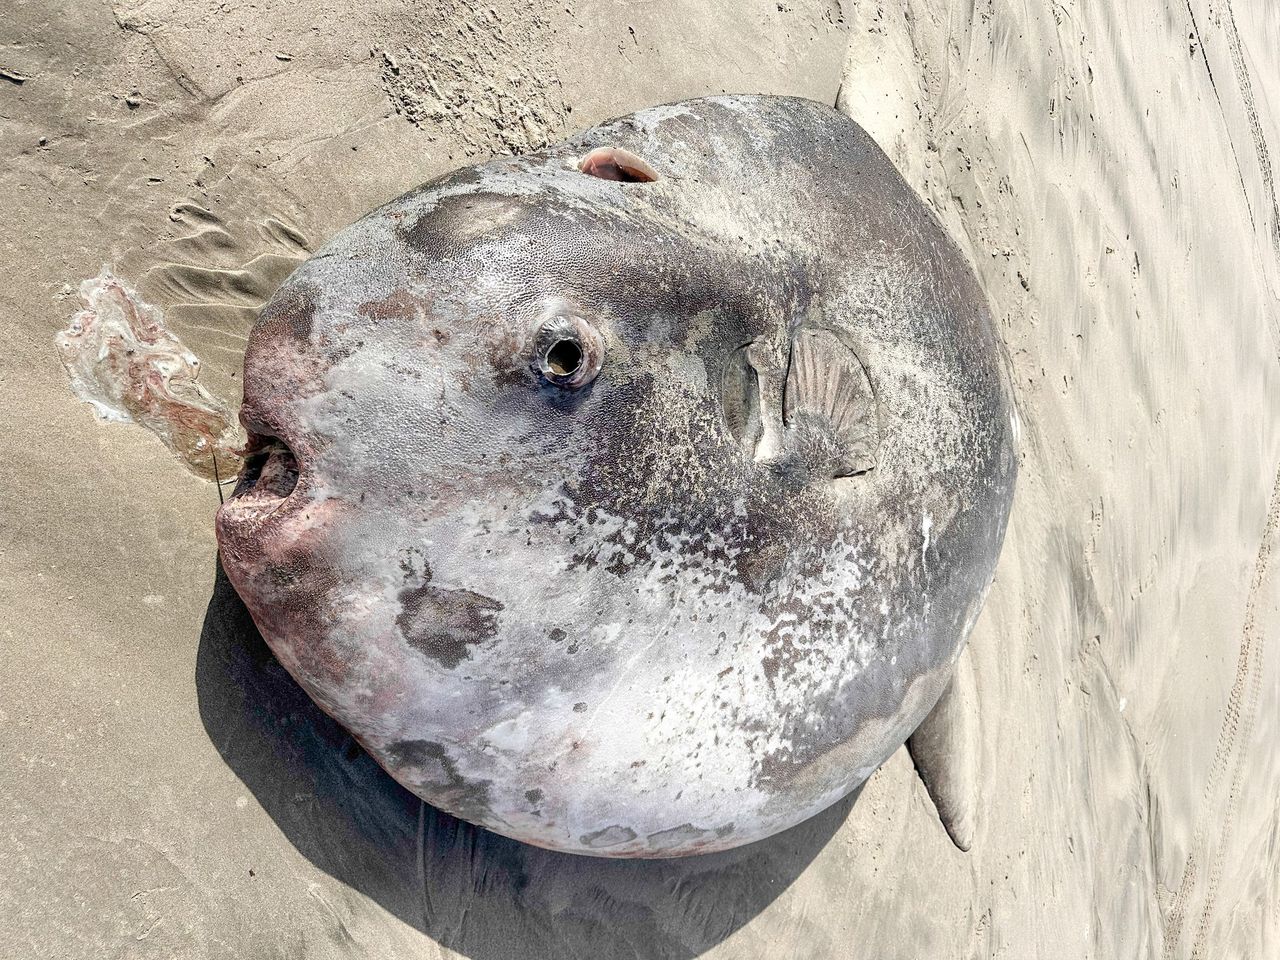 A sunfish washed up on the beach at Gearhart in Oregon